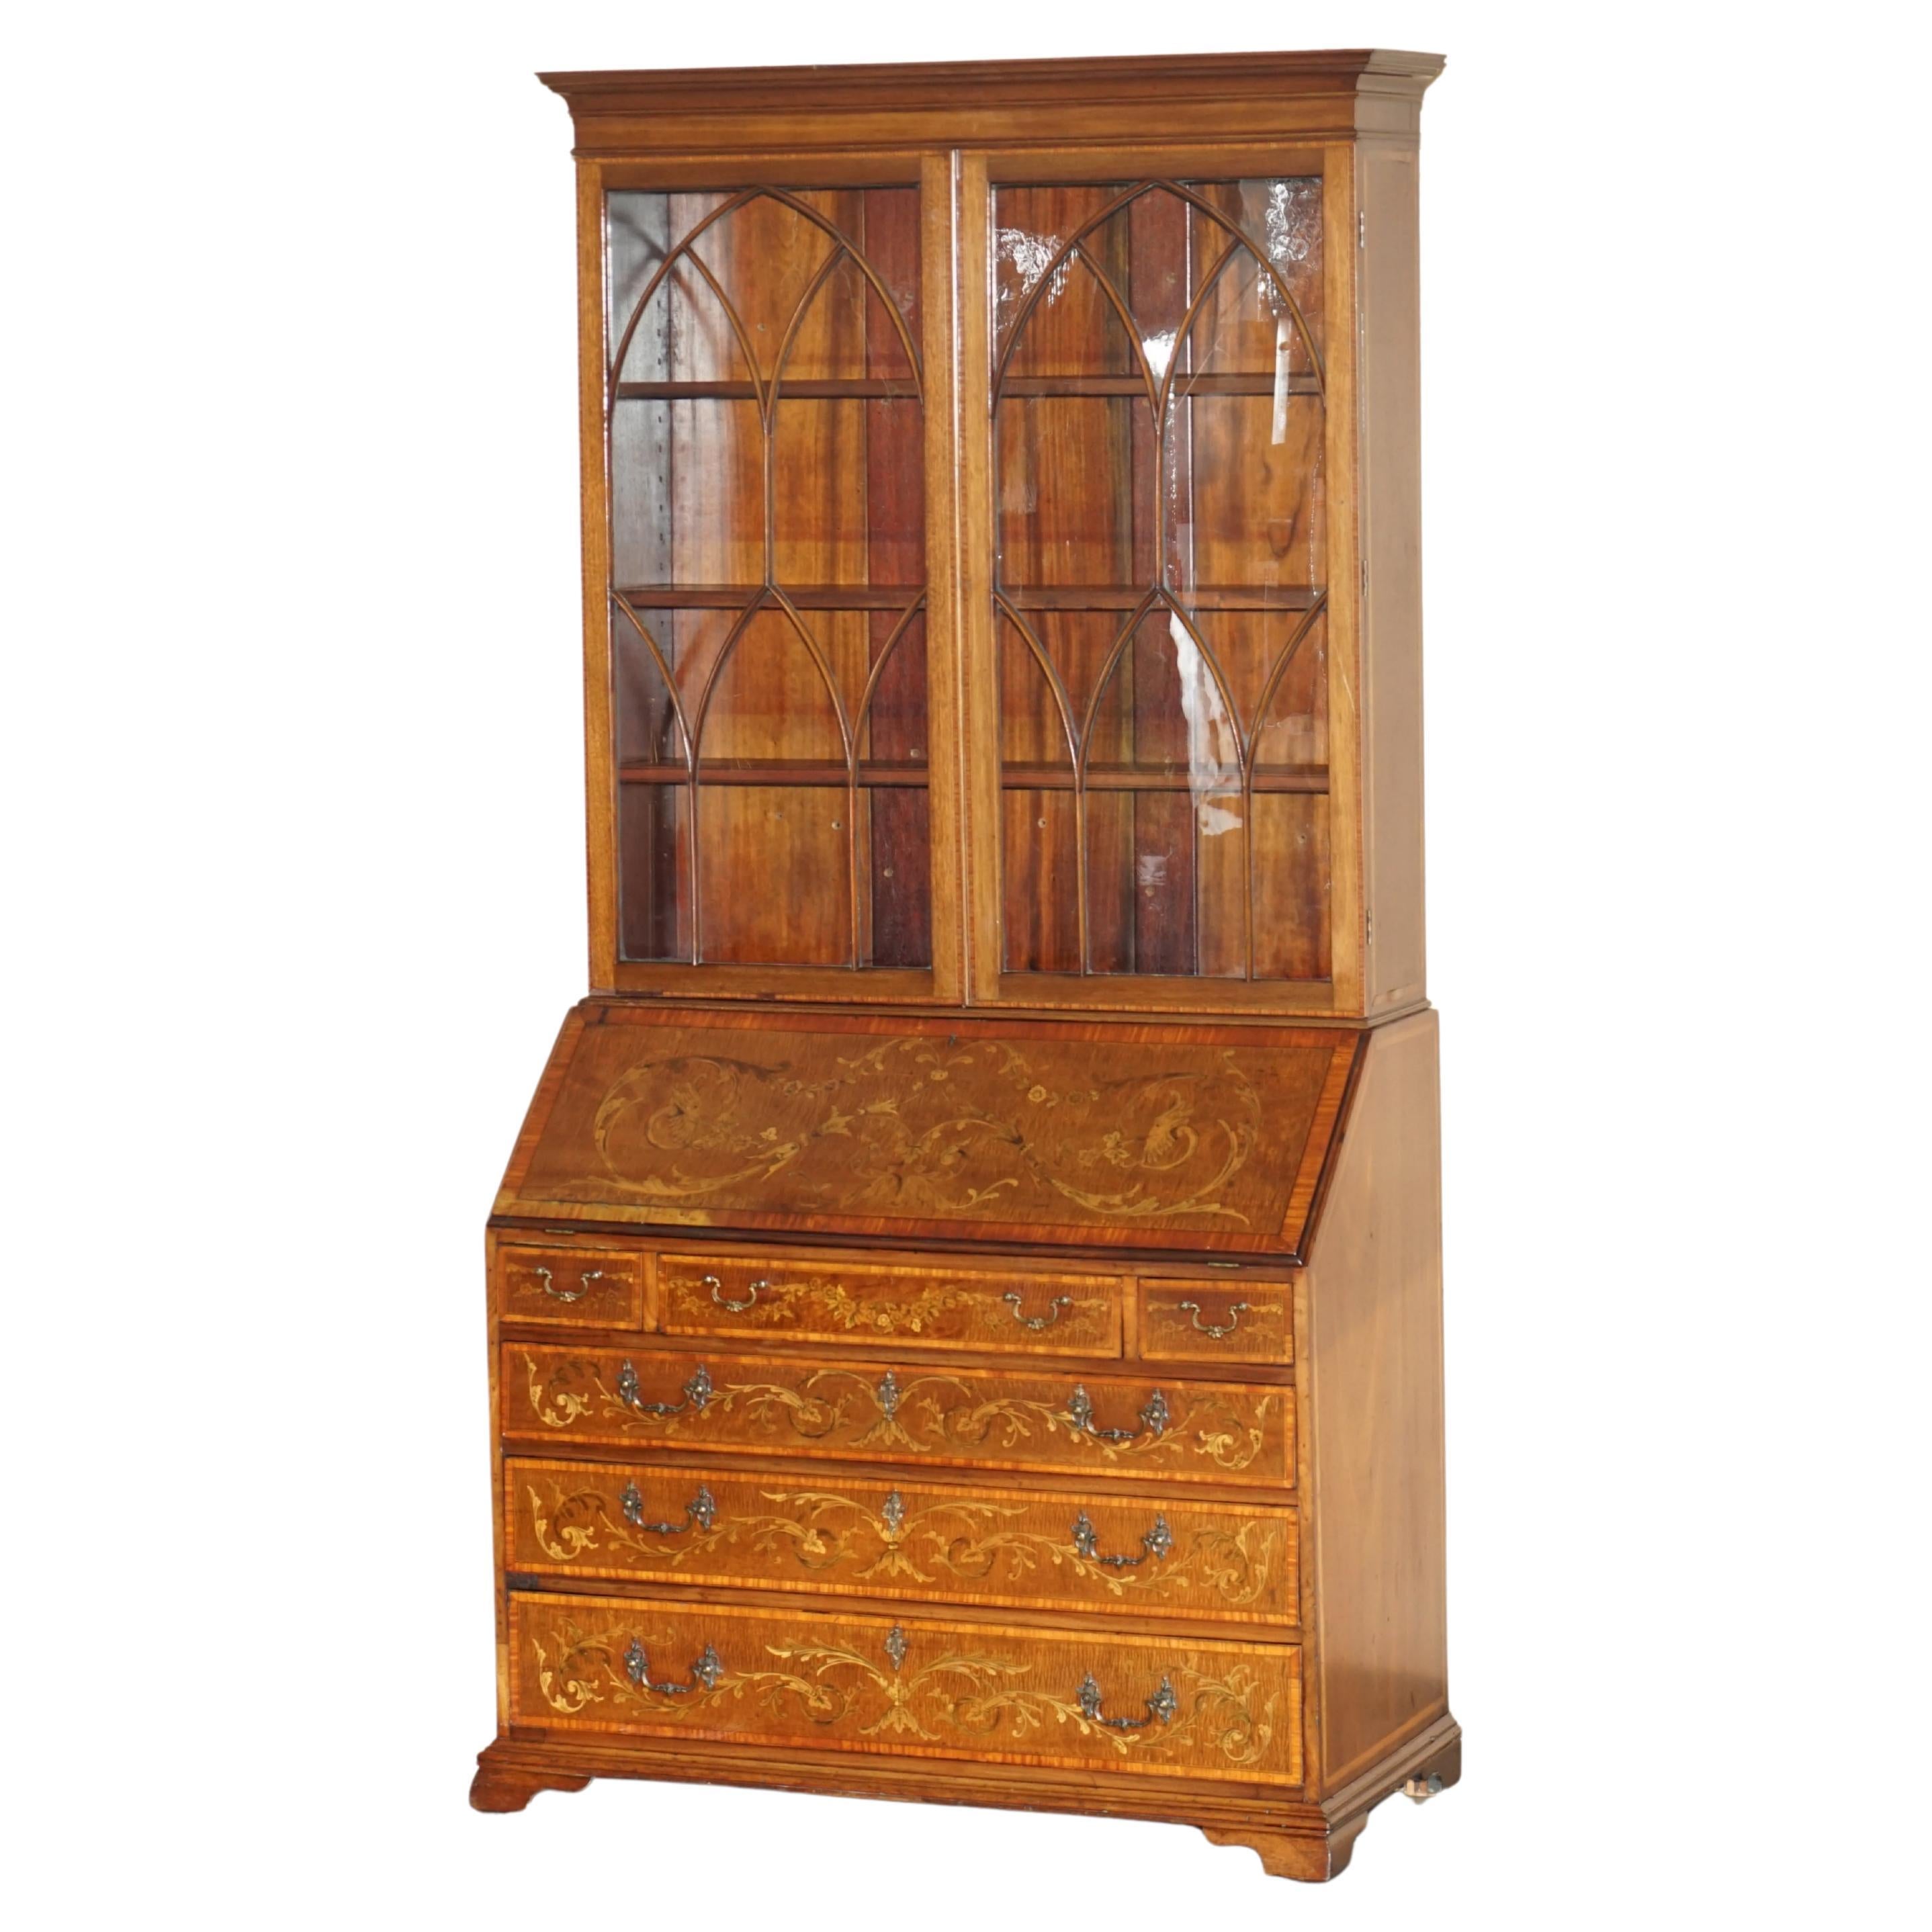 STUNNiNG ANTIQUE CIRCA 1840 SHERATON REVIVAL LIBRARY BUREAU BOOKCASE ON DRAWERS For Sale